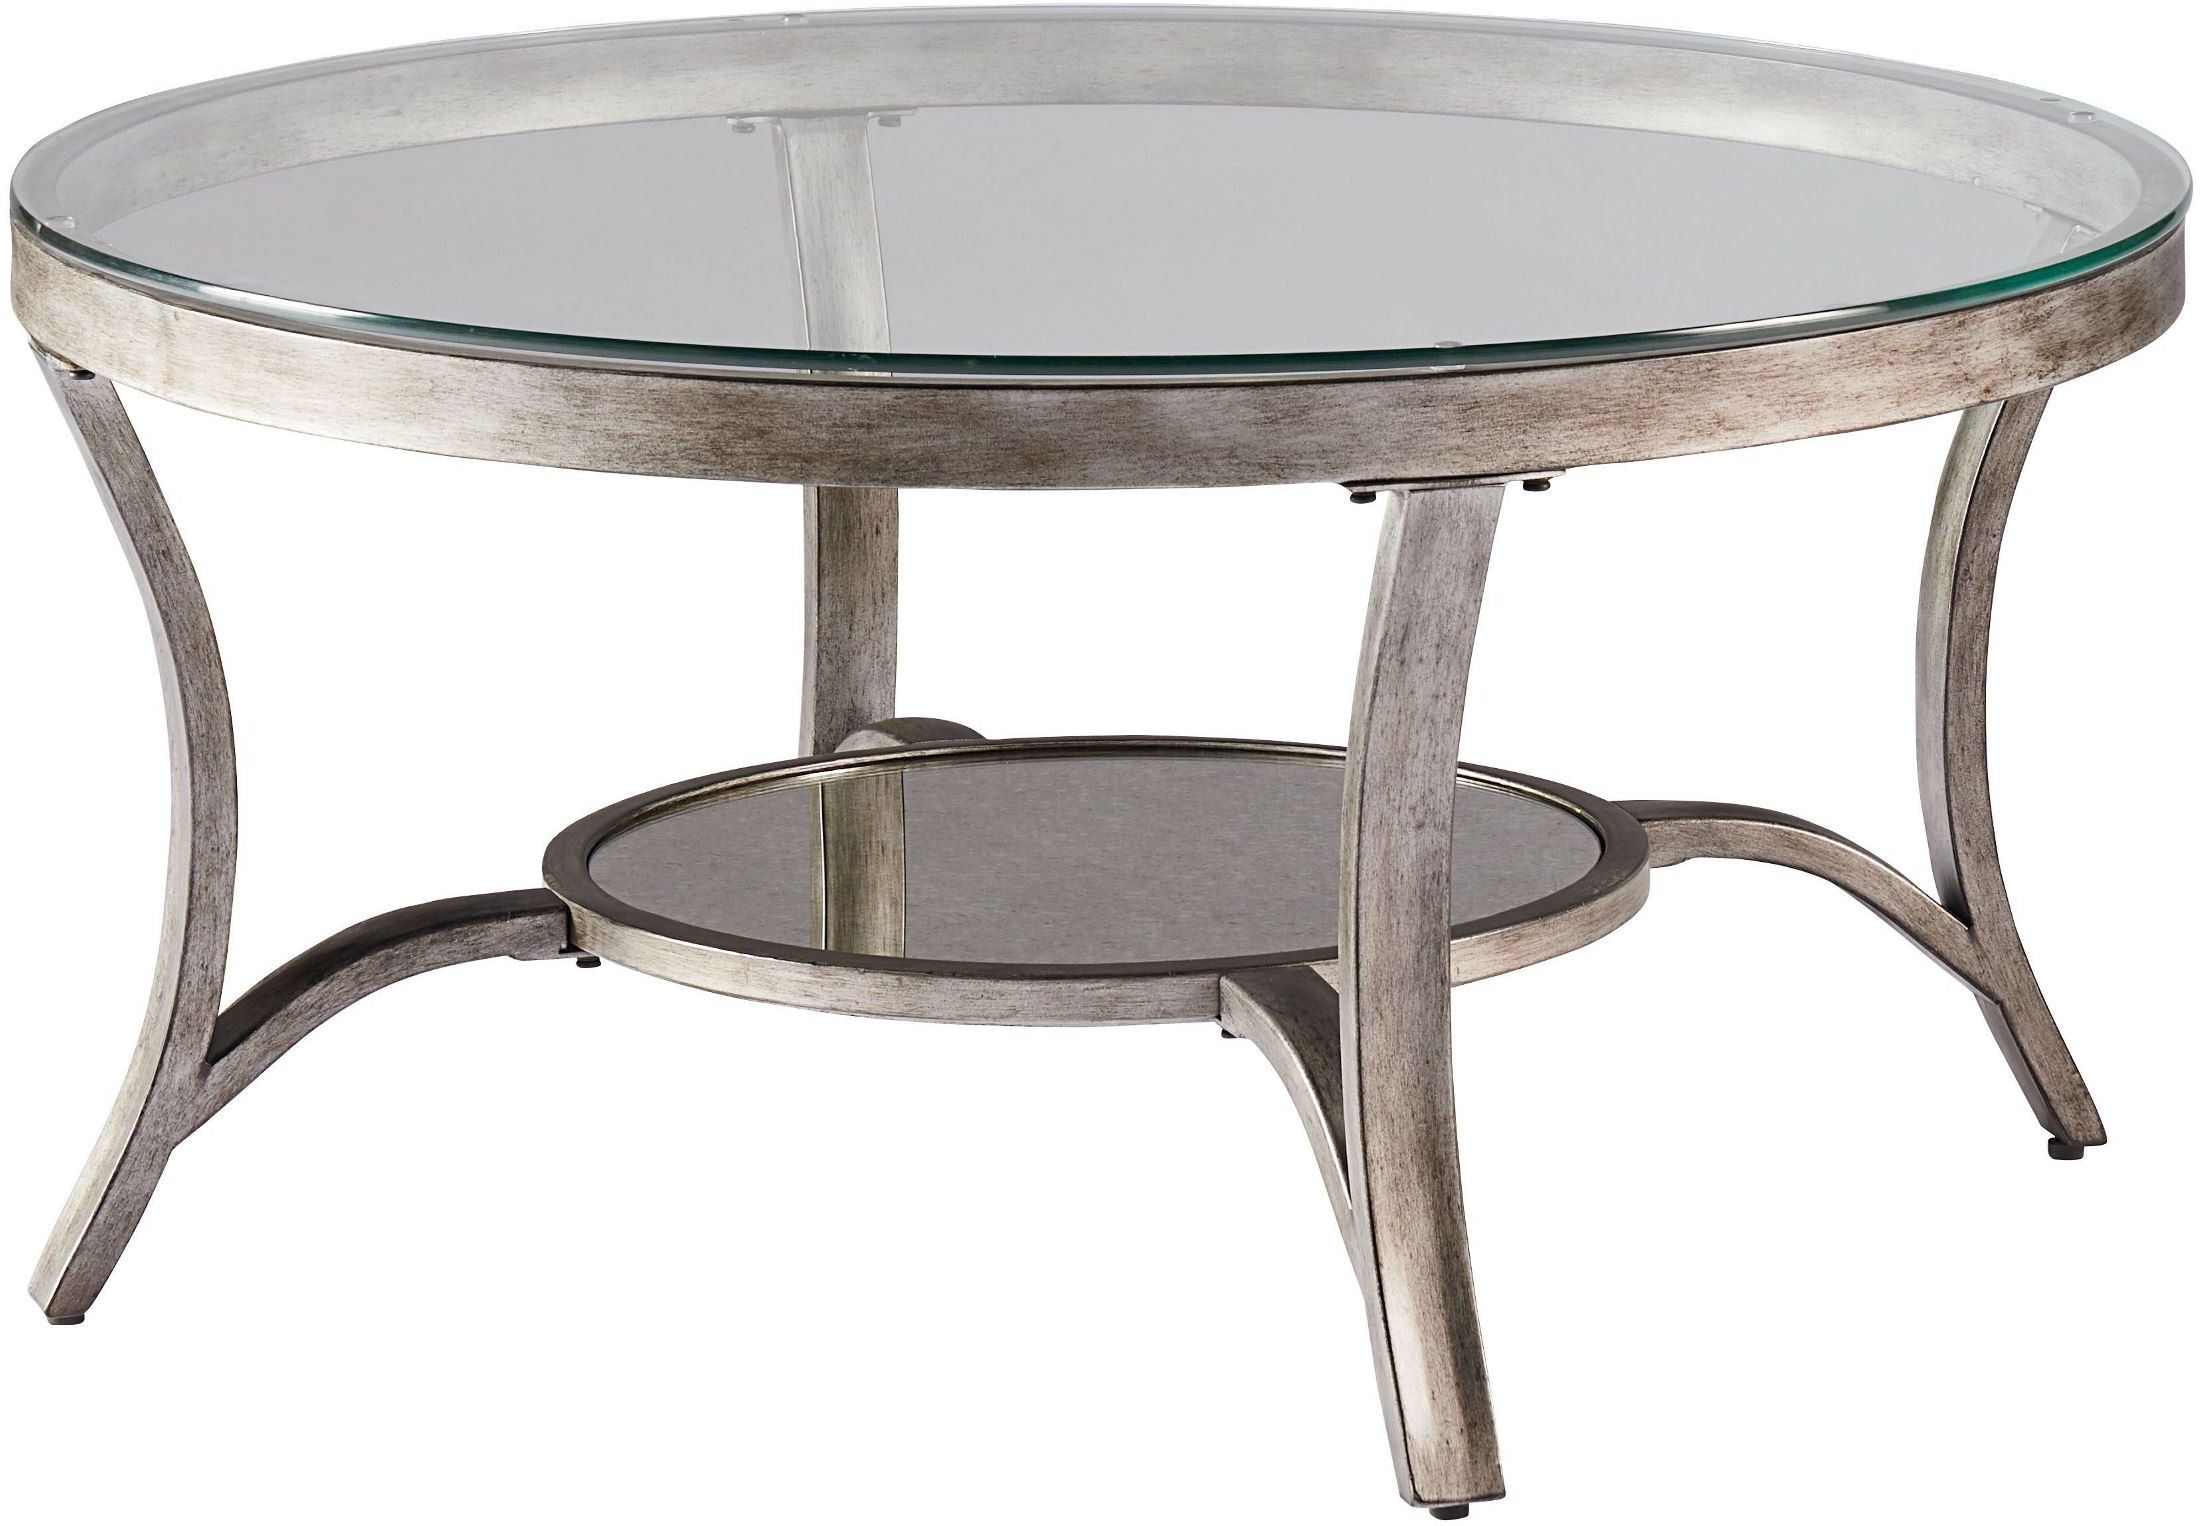 Cole Champagne Metal Cocktail Table From Standard Throughout Most Popular Metallic Silver Cocktail Tables (View 11 of 20)